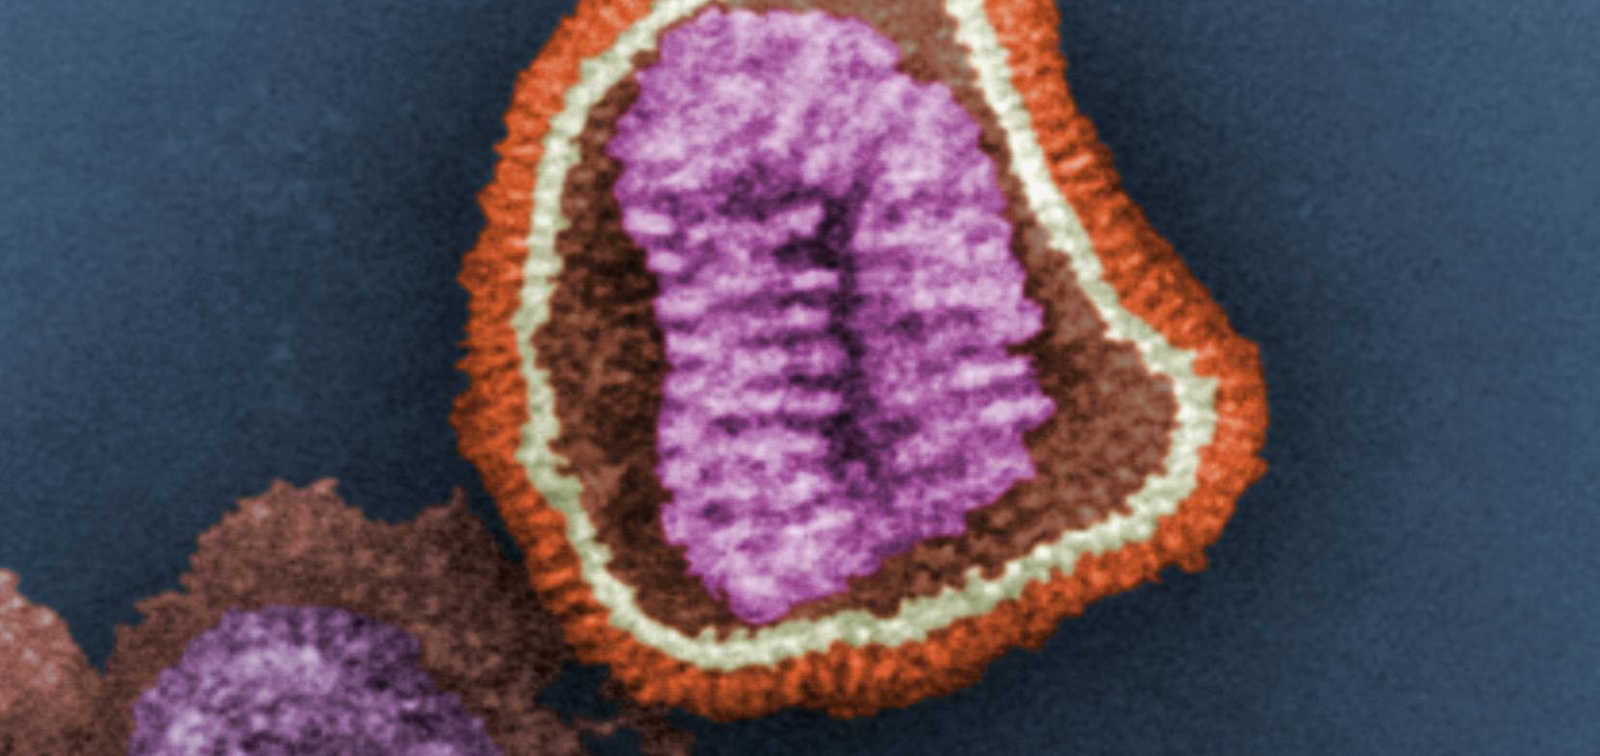 Influenza virus particle in color